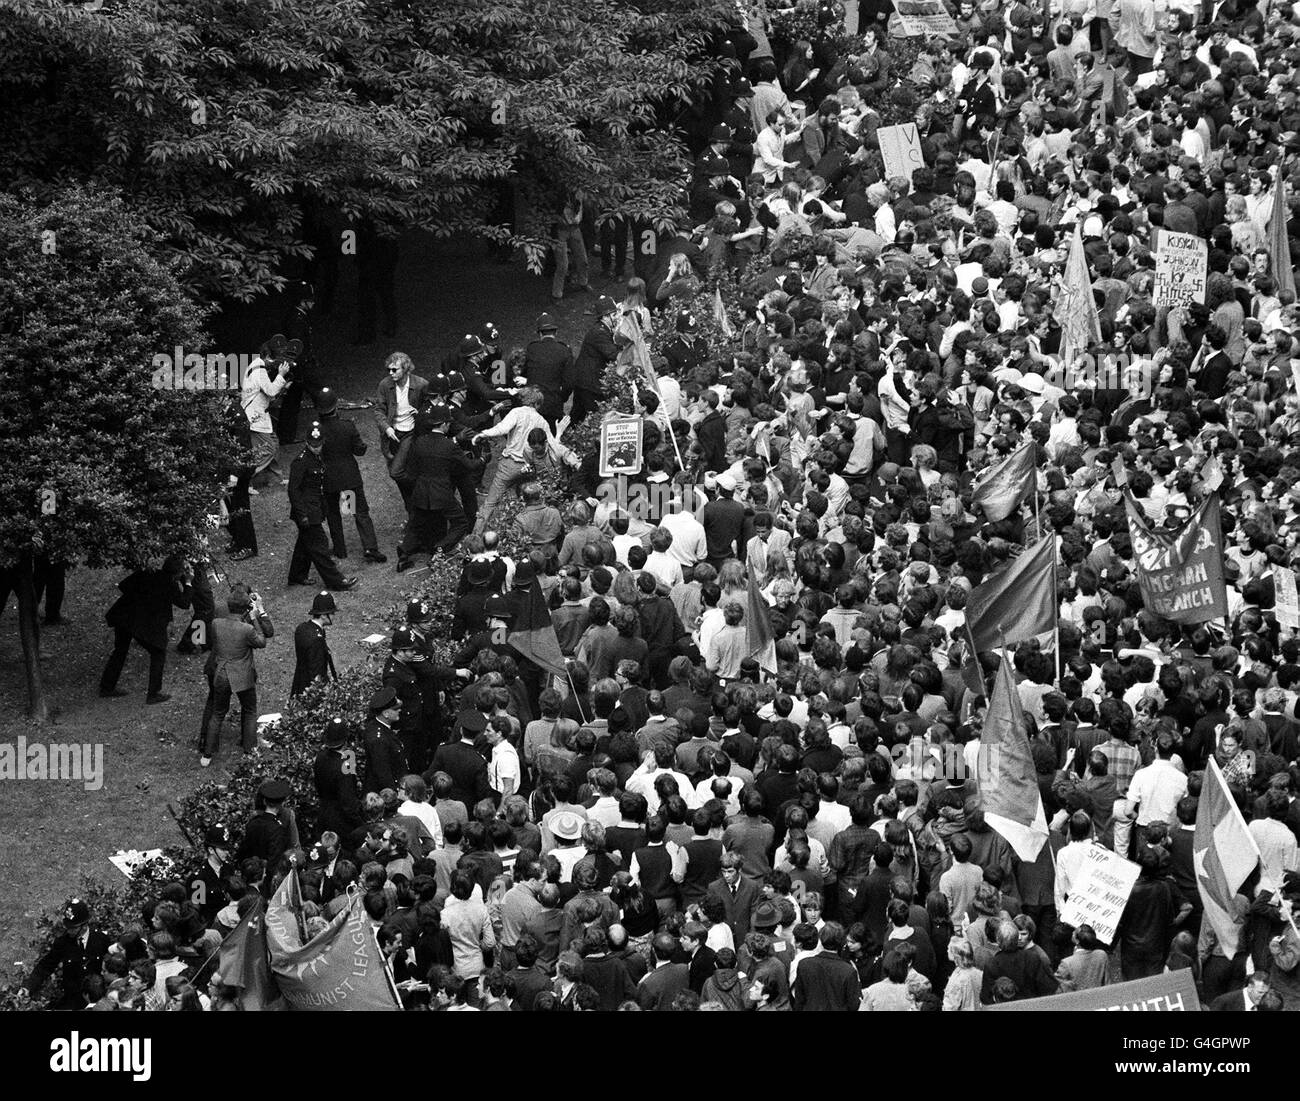 21/7/1968 Disturbances in London's Grosvenor Square. Prime Minister Harold Wilson was warned by MI5 that Communist agitators were planning to infiltrate the annual CND Aldermaston march following the Grosvenor Square riots in 1968, according to official papers released today. Documents made available at the Public Record Office for the first time under the 30-year rule show the deep fears triggered within the establishment by violent anti-Vietnam War protests that March in Grosvenor Square. See PA story RECORDS March Stock Photo